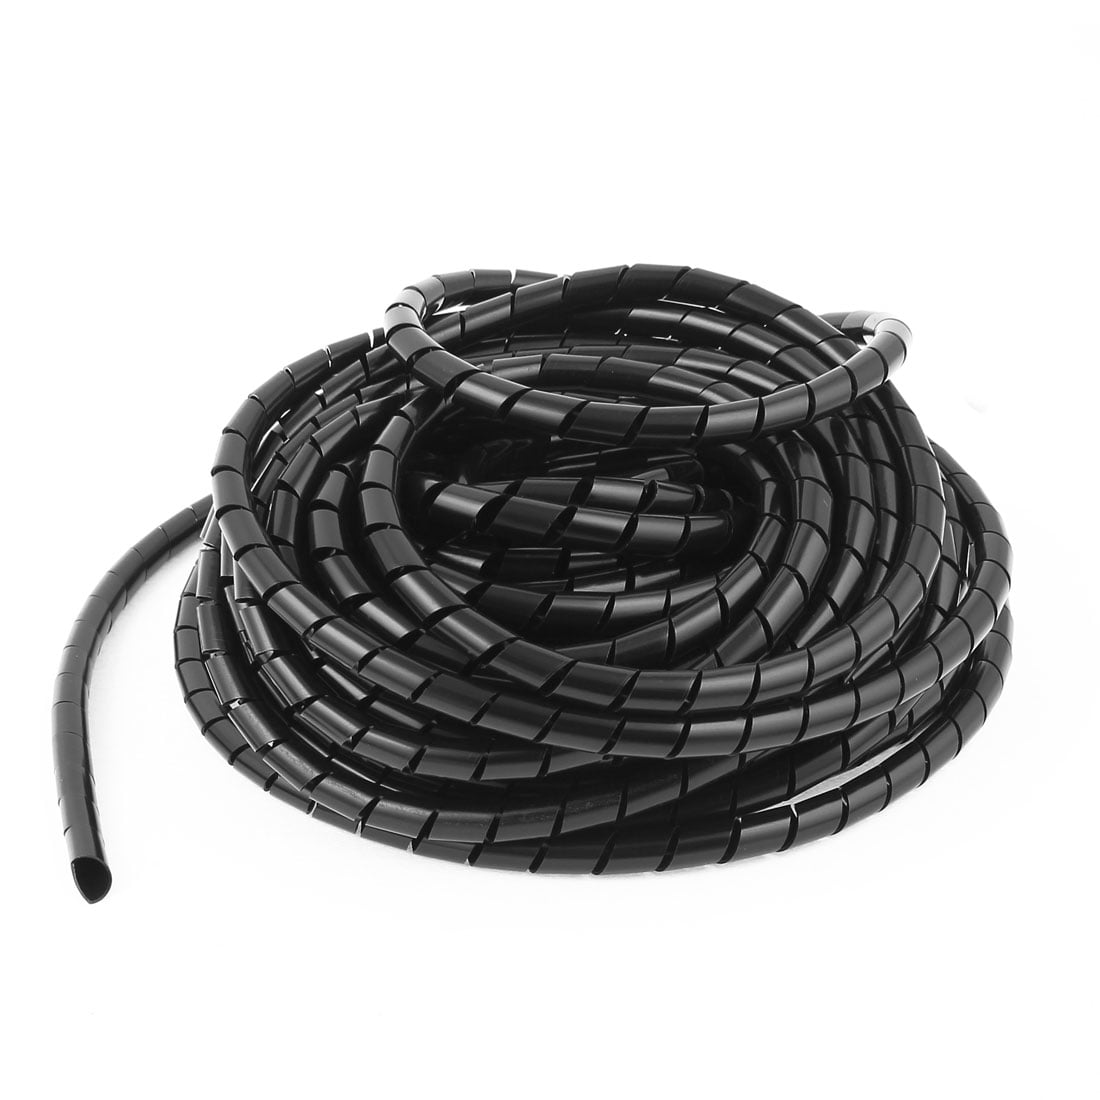 Spiral conduit *Top Quality! Tube Split Sleeve 6mm 25 Metres Cable tidy 